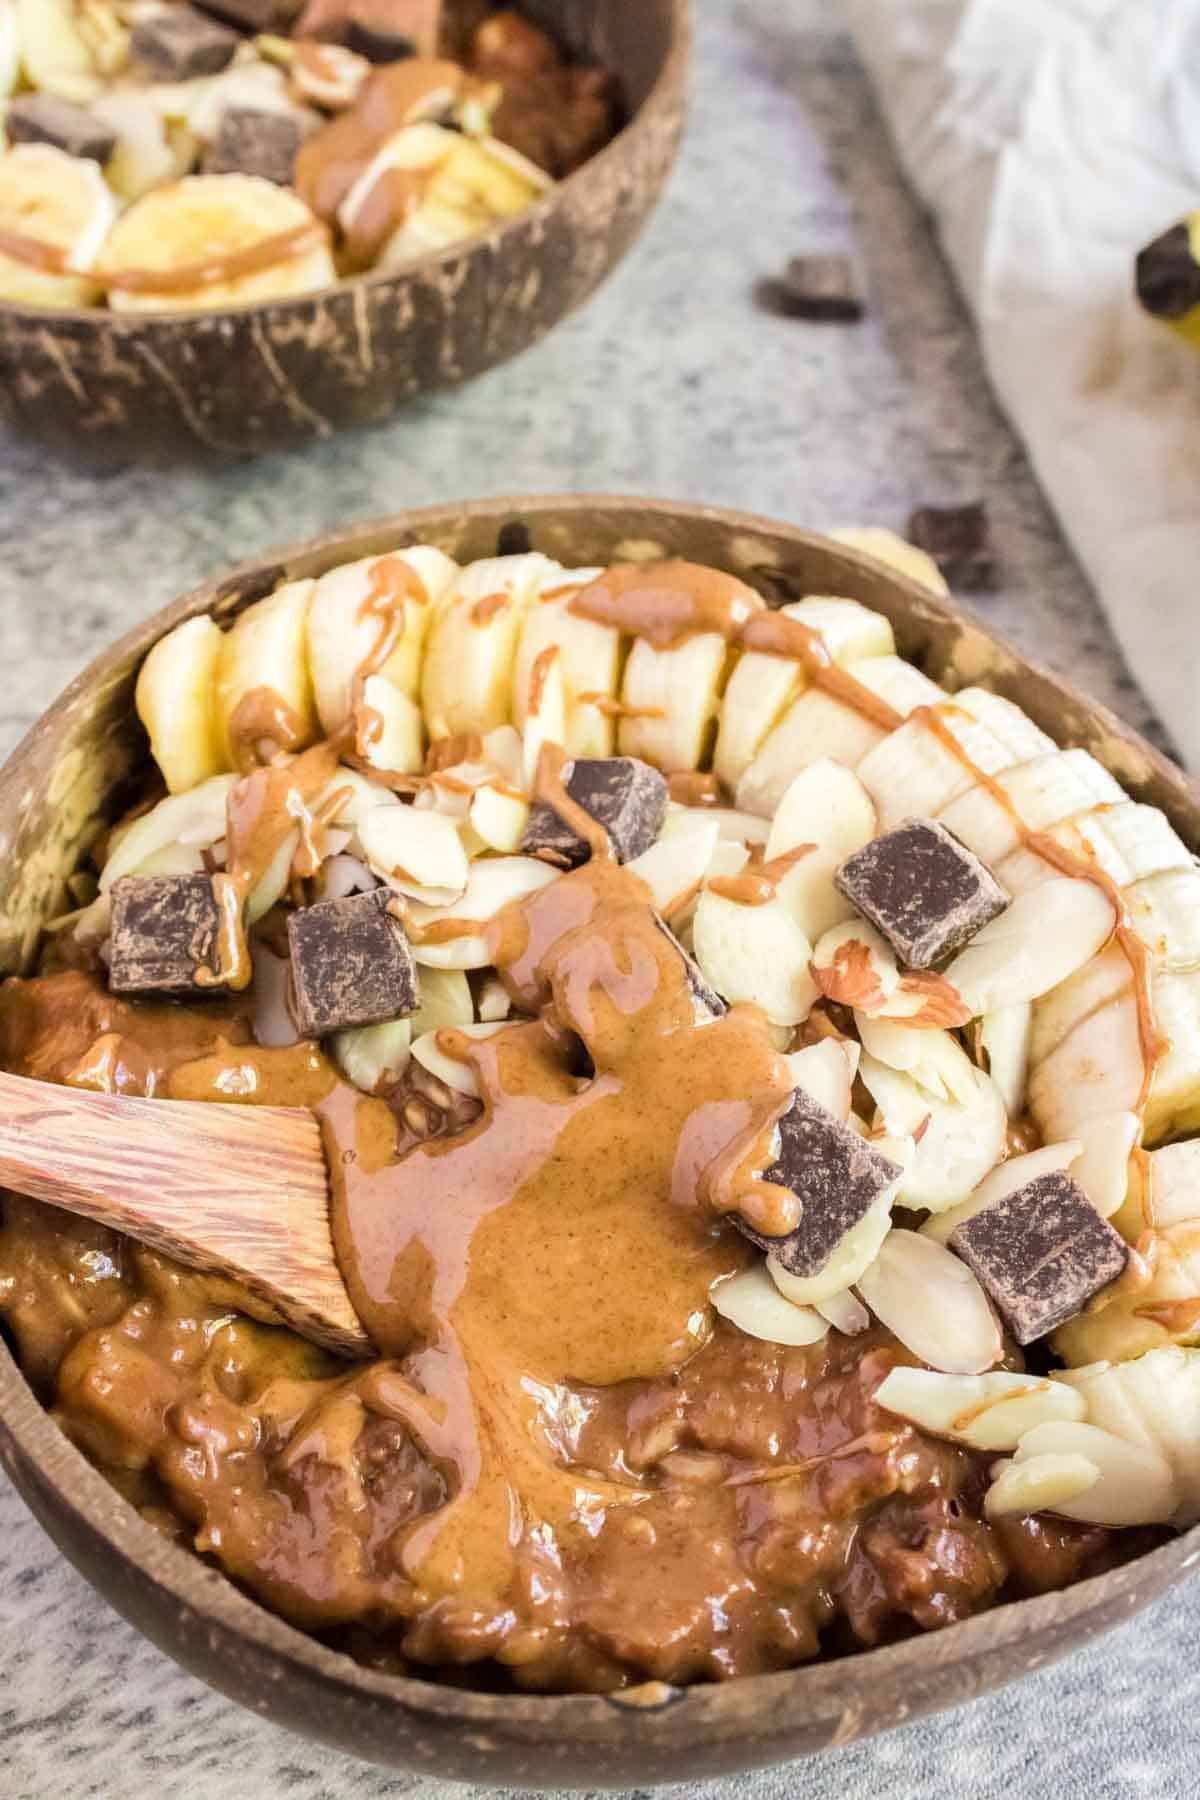 A bowl of chocolate oatmeal topped with a drizzle of almond butter, sliced almonds, chocolate chunks, and banana slices.